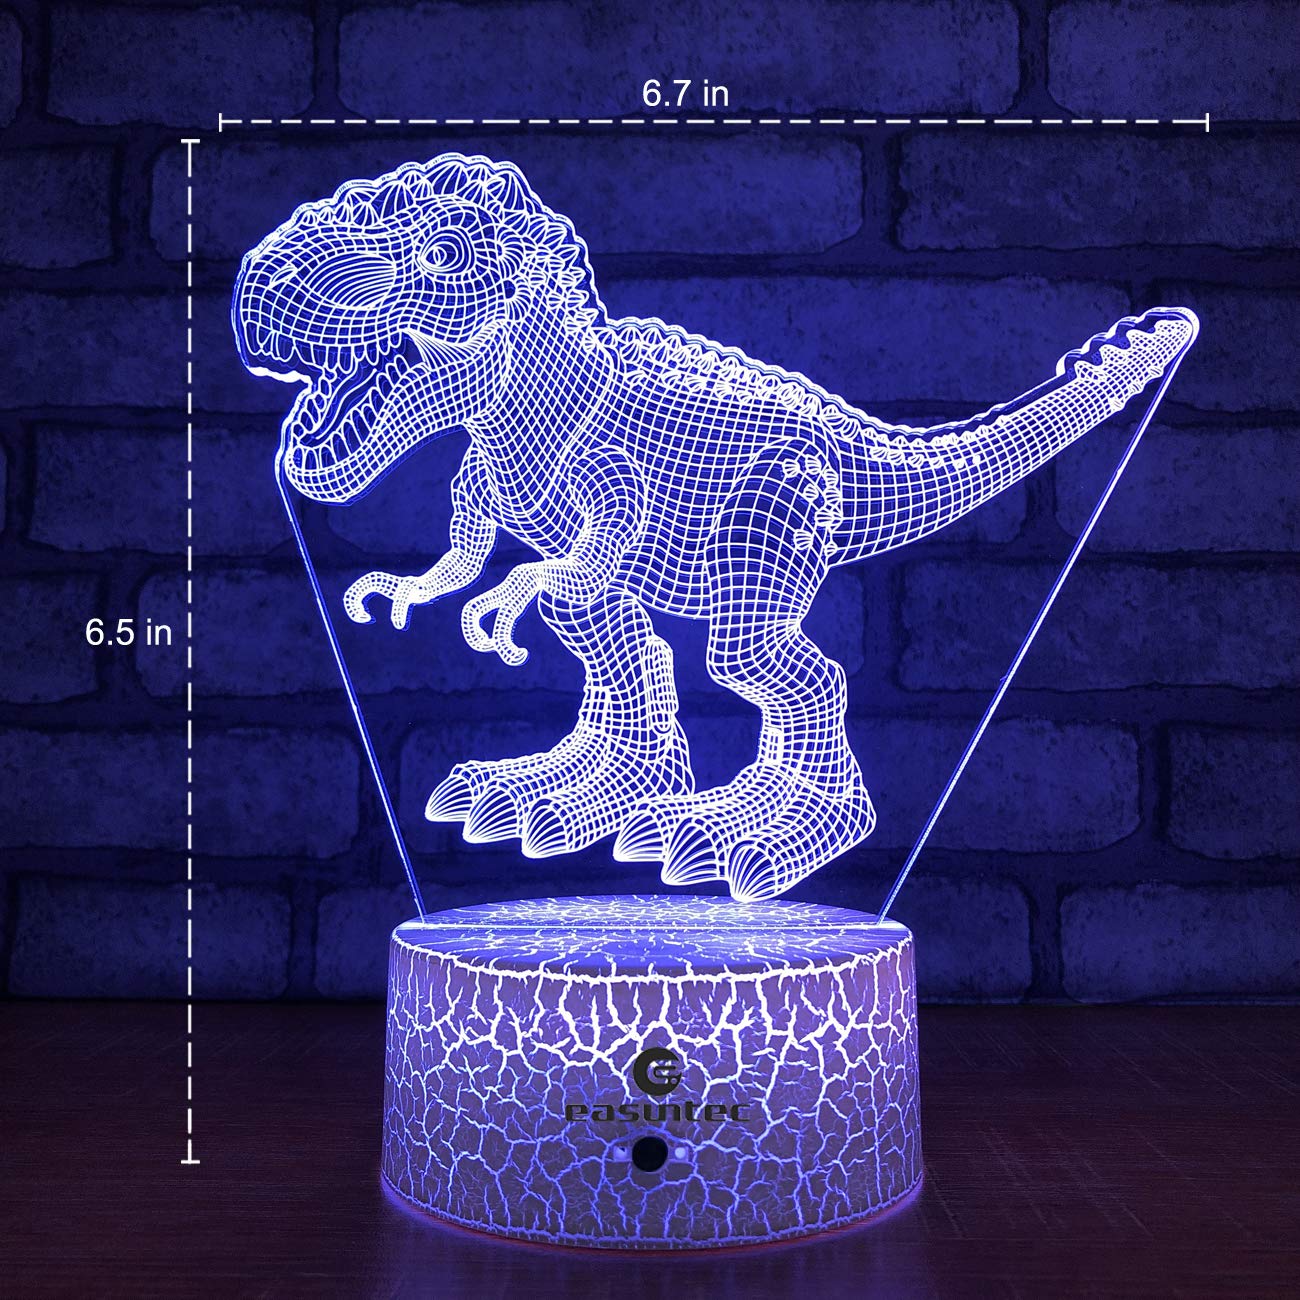 easuntec Dinosaur Toys 3D Night Light with Remote & Smart Touch 7 Colors + 16 Colors Changing Dimmable TRex Toys 1 2 3 4 5 6 7 8 Year Old Boy or Girl Gifts (TRex 16WT)